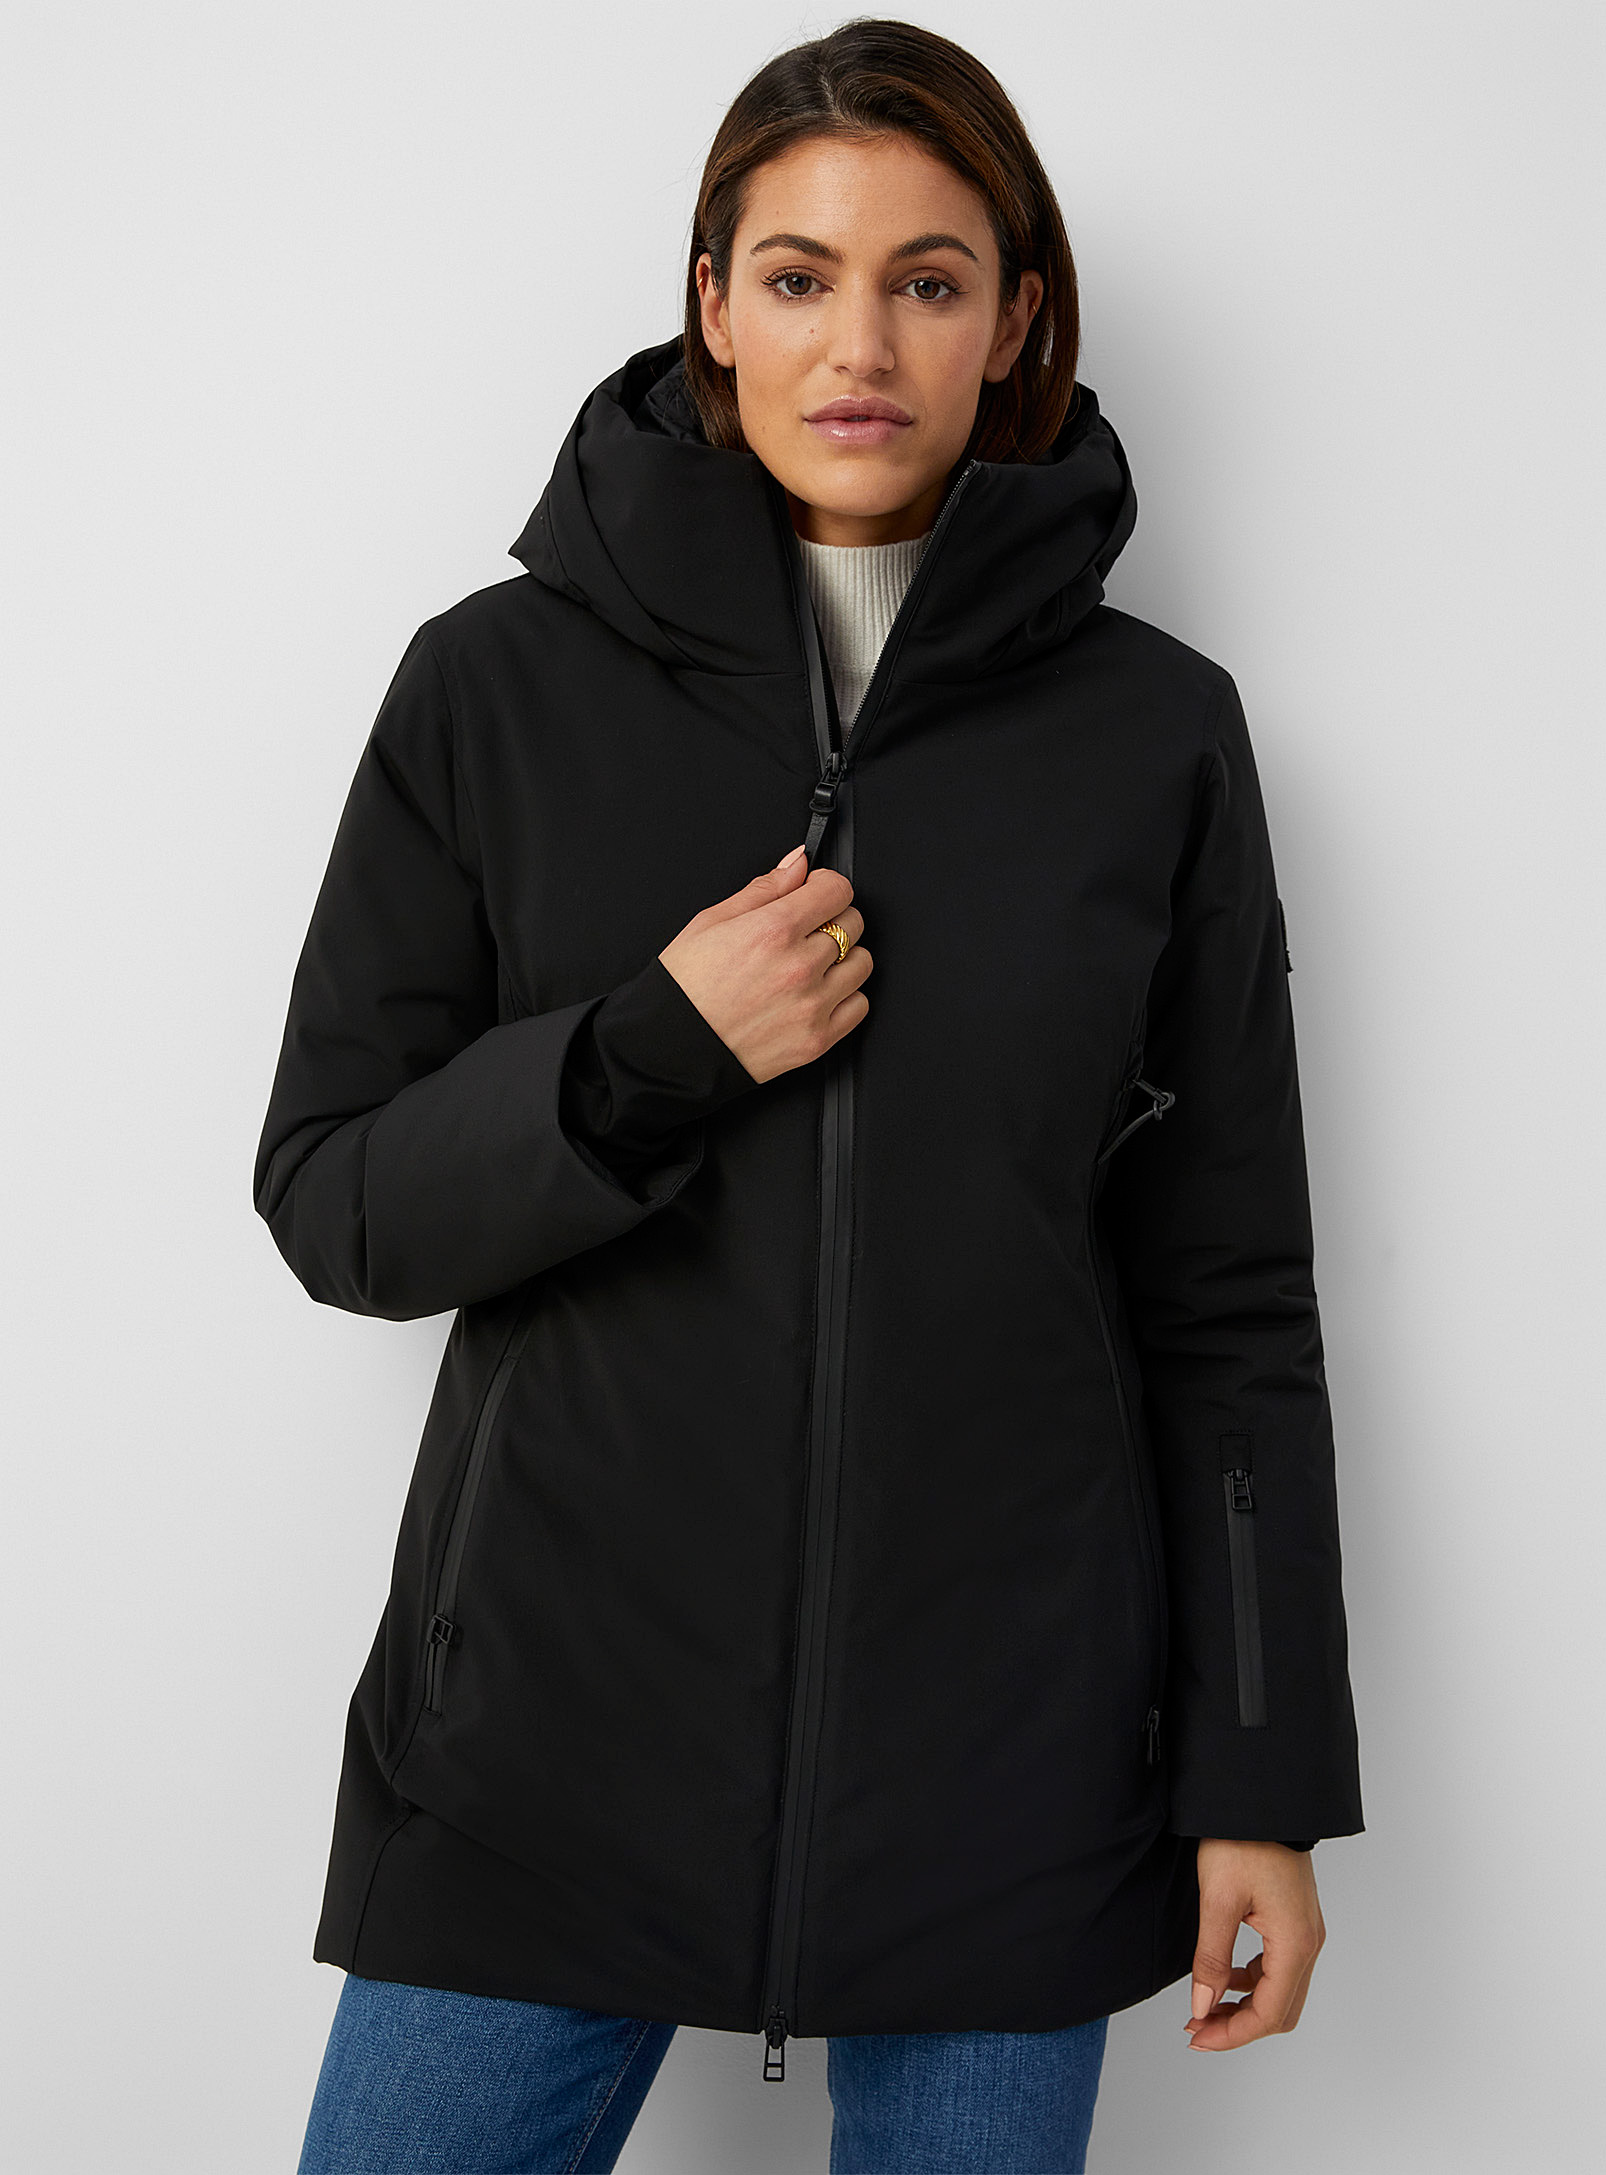 Kanuk - Women's Laurier fitted Parka Jacket